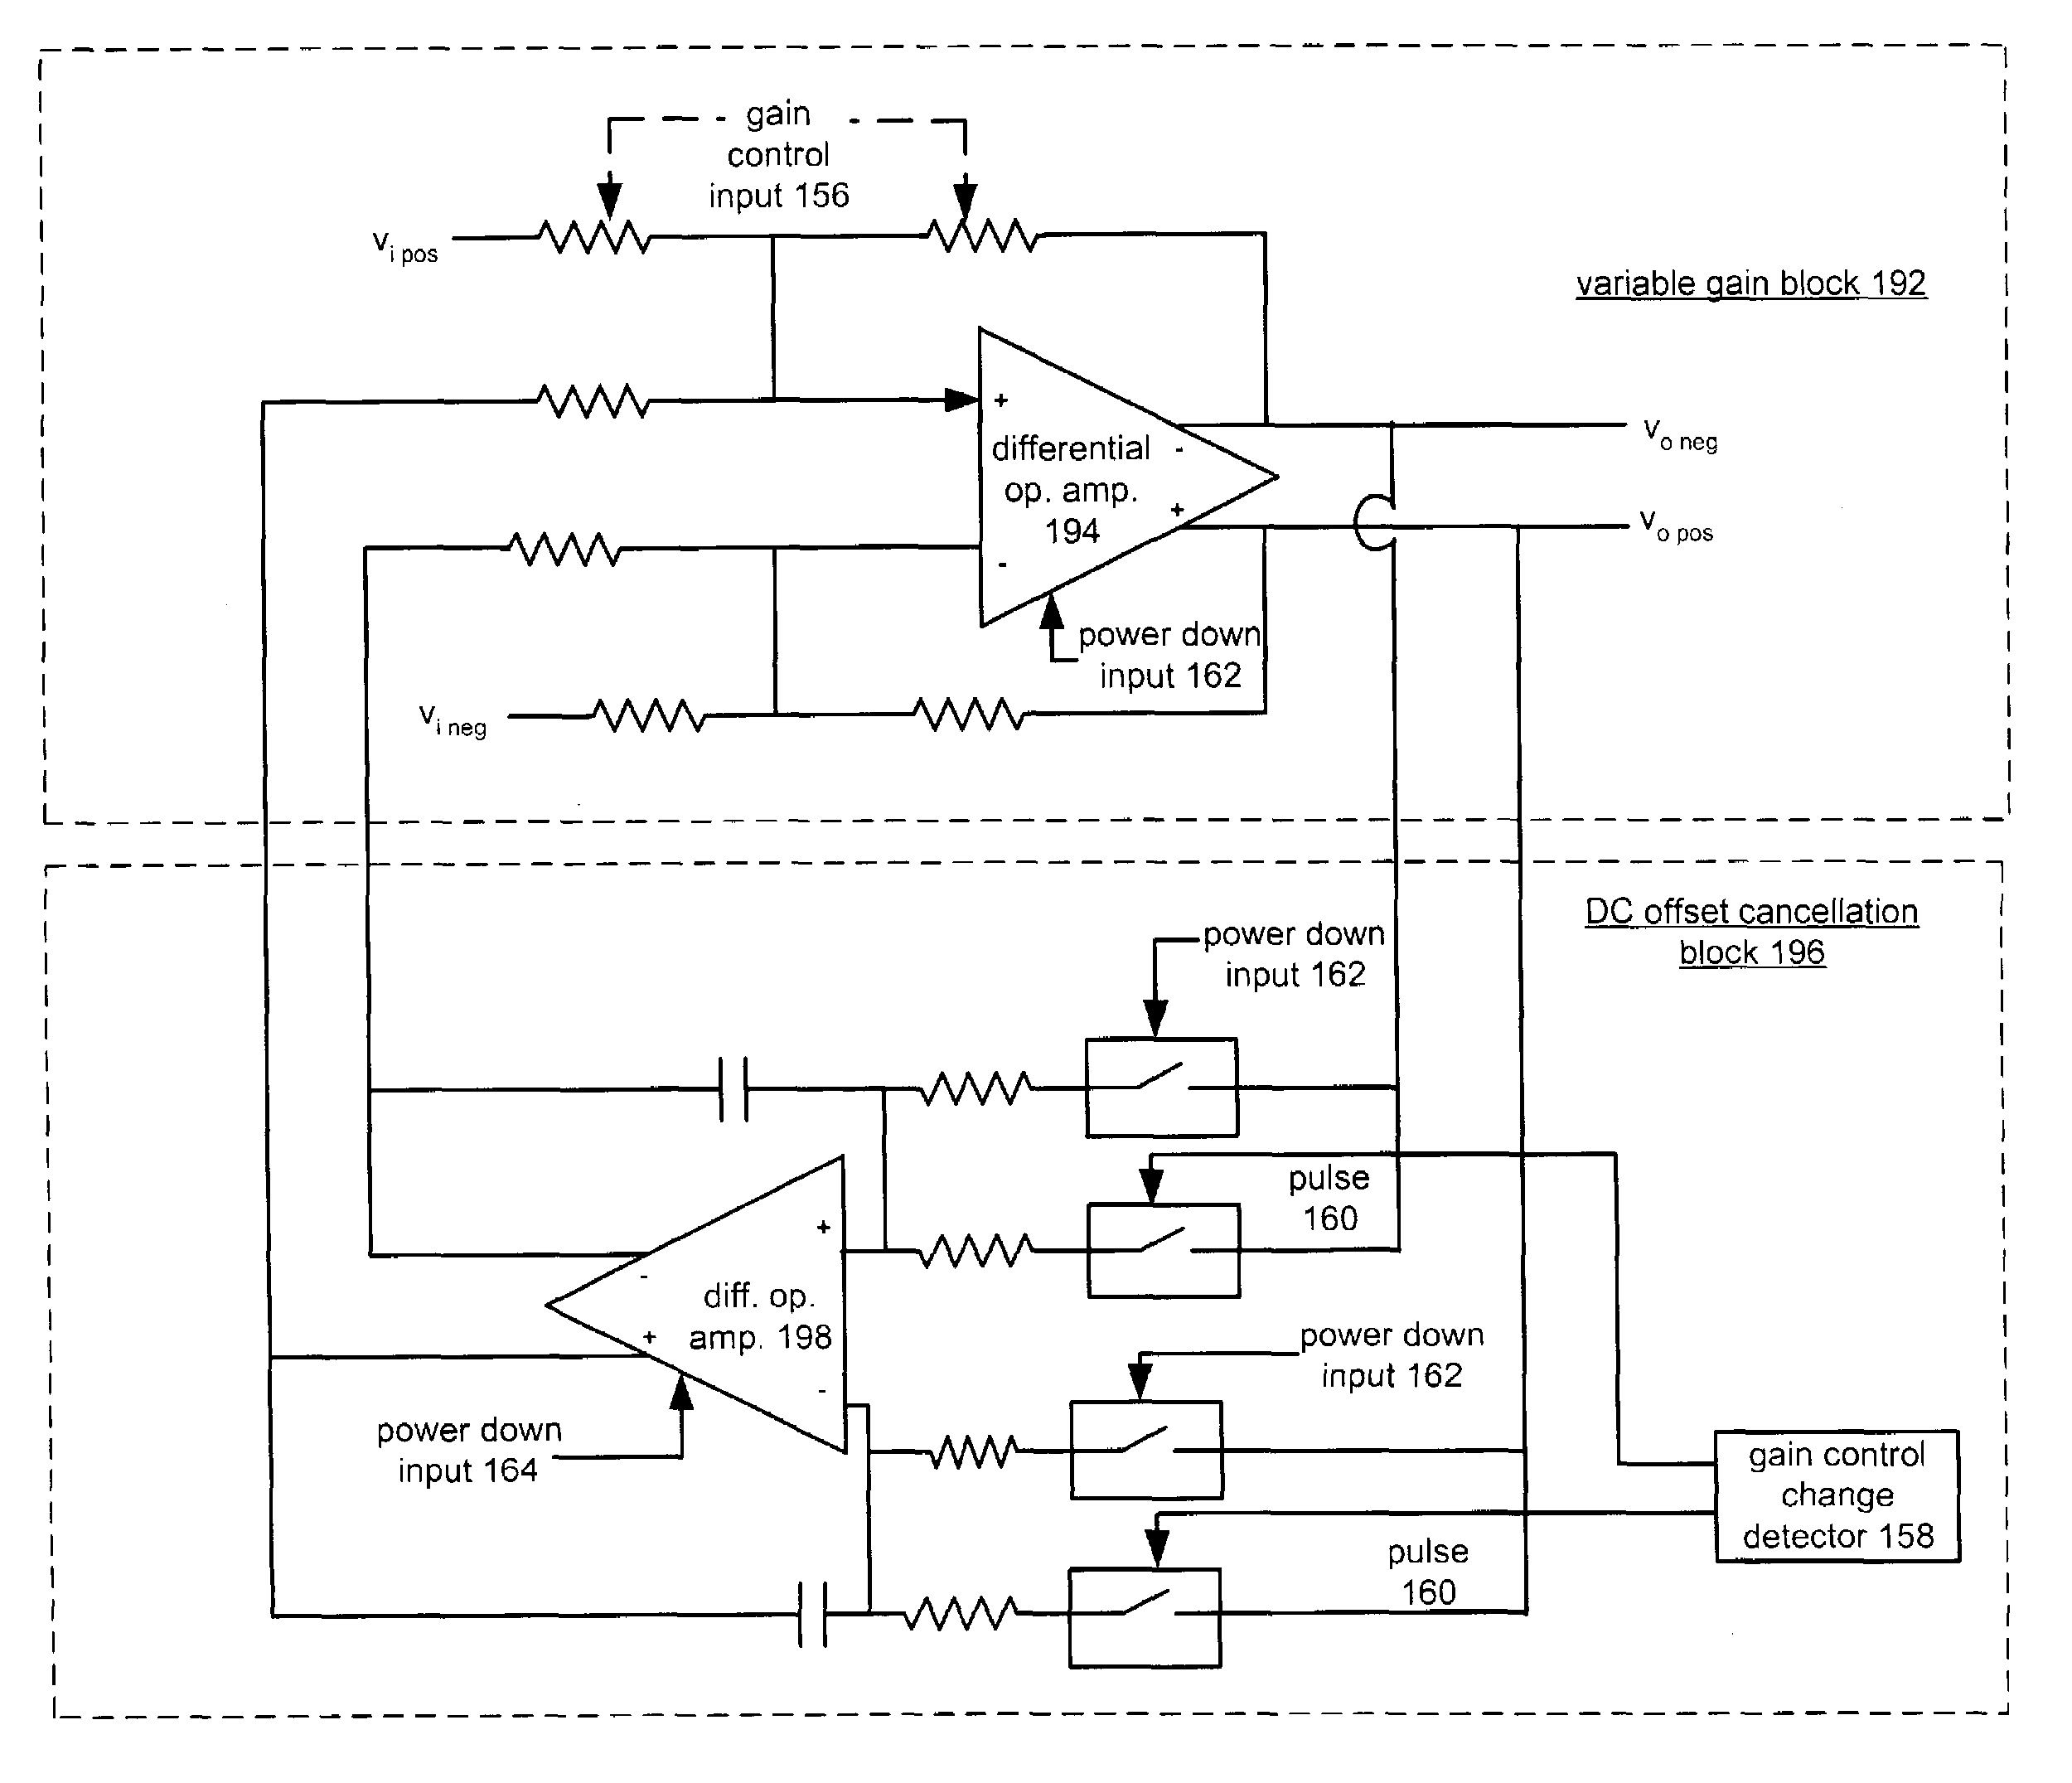 Fast settling variable gain amplifier with DC offset cancellation